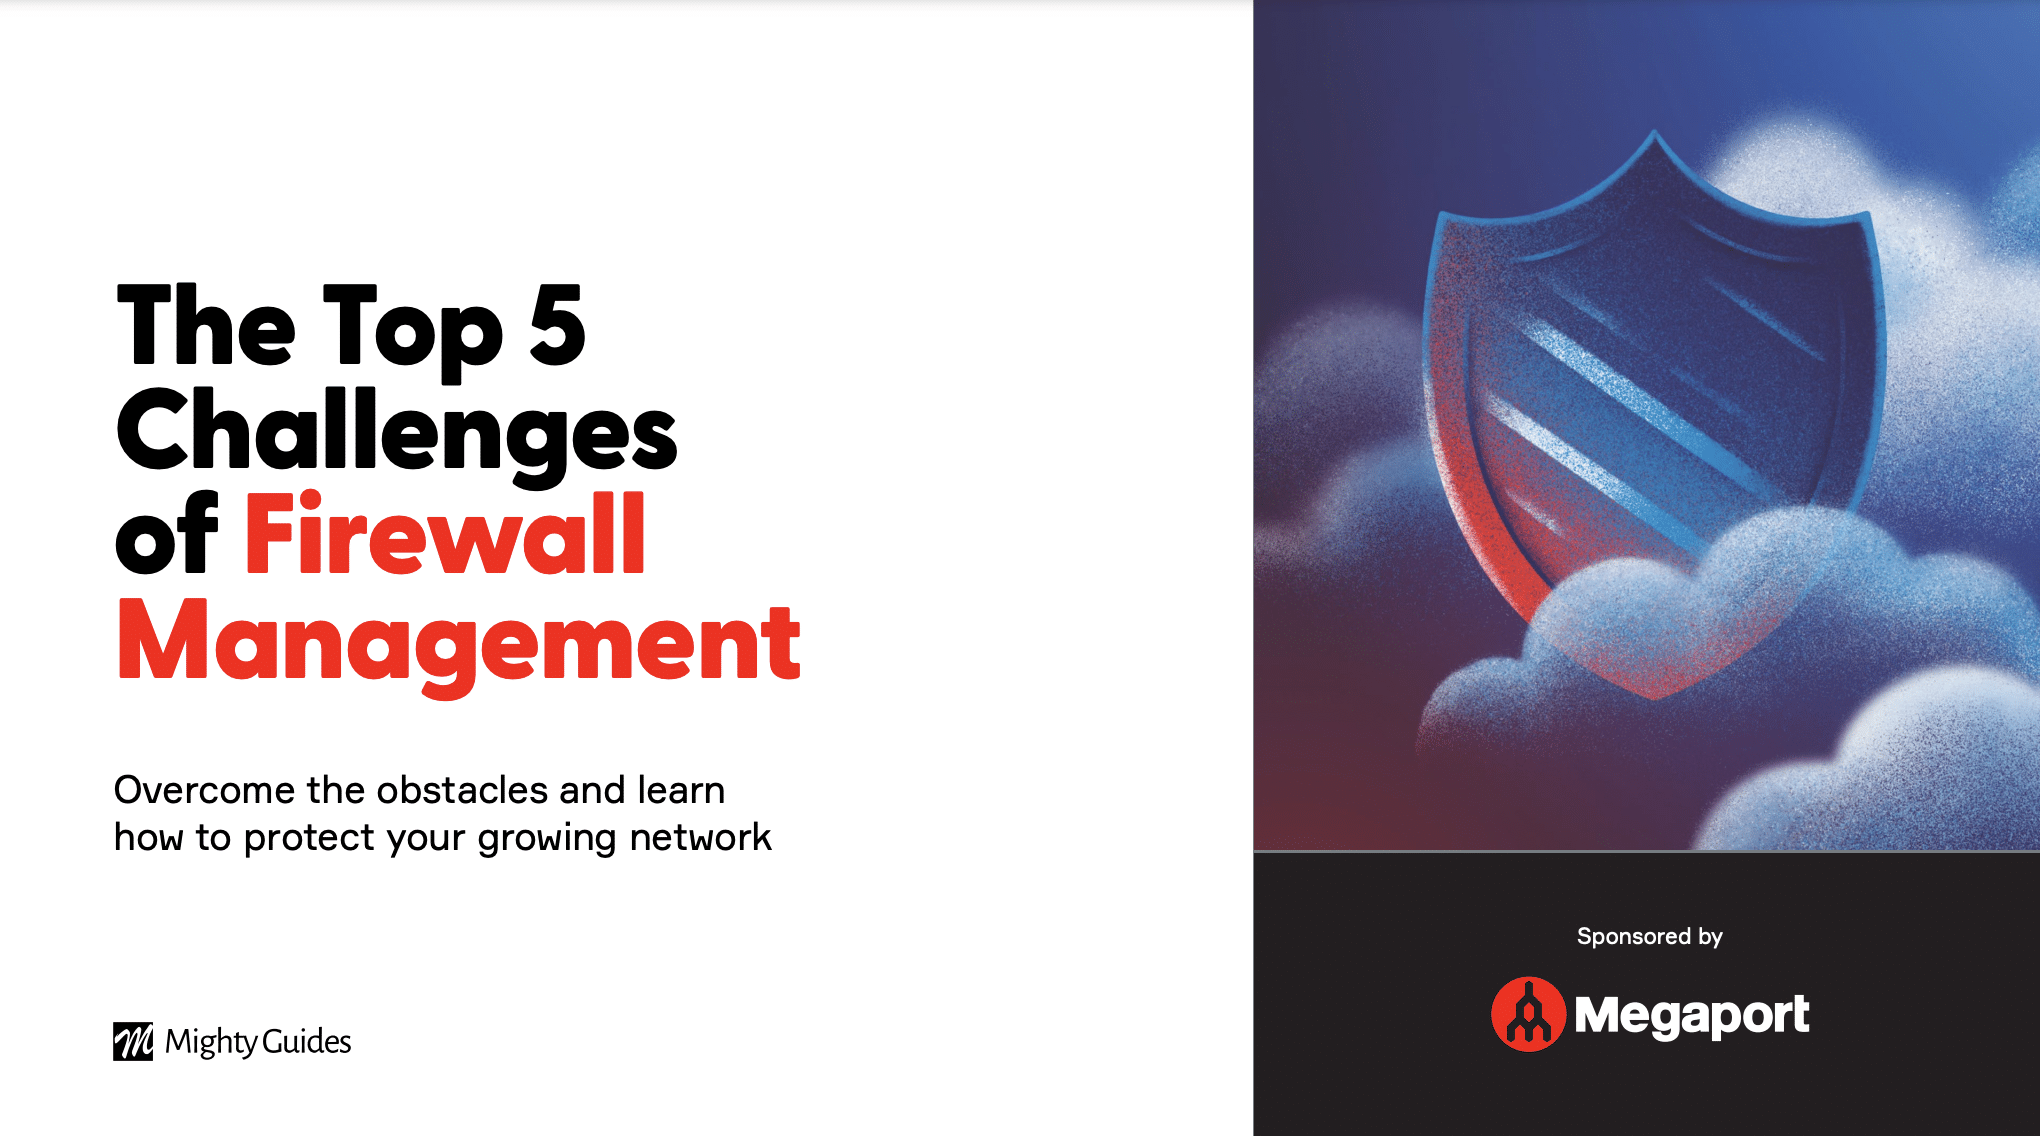 Megaport: The Top 5 Challenges of Firewall Management